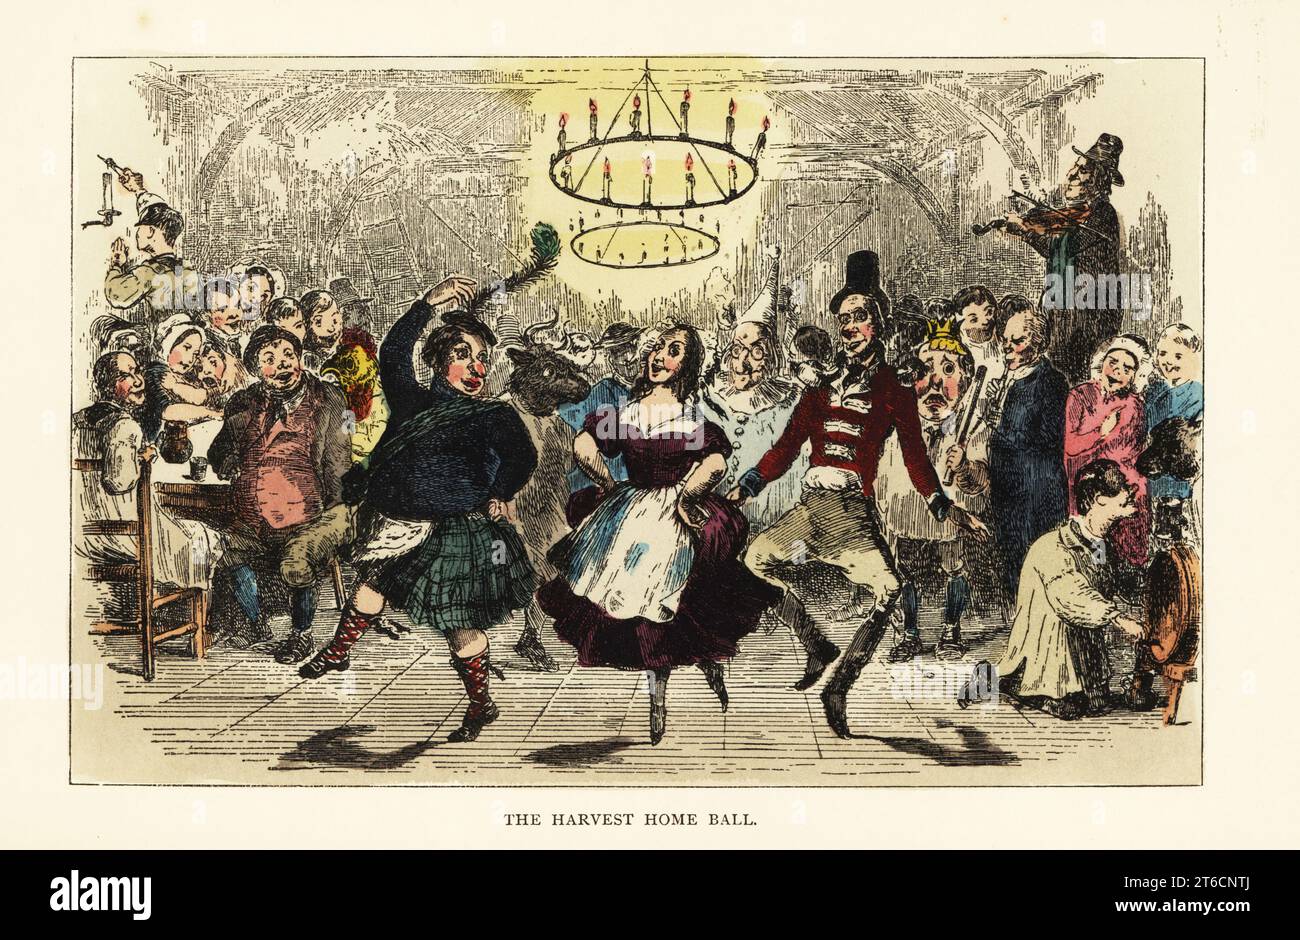 Peasants and farmers dancing at a harvest festival in a barn with rustic chandeliers, 19th century. Jorrocks as a Scotsman in a kilt, a man in a soldiers uniform, others as clowns, cows and Humpty Dumpty. The Harvest Home Ball. Handcoloured steel engraving after an illustration by Wildrake, Heath or Jellicoe from Robert Smith Surtees Hillingdon Hall, or the Cockney Squire, a Tale of Country Life, John C. Nimmo., London, 1844. Stock Photo